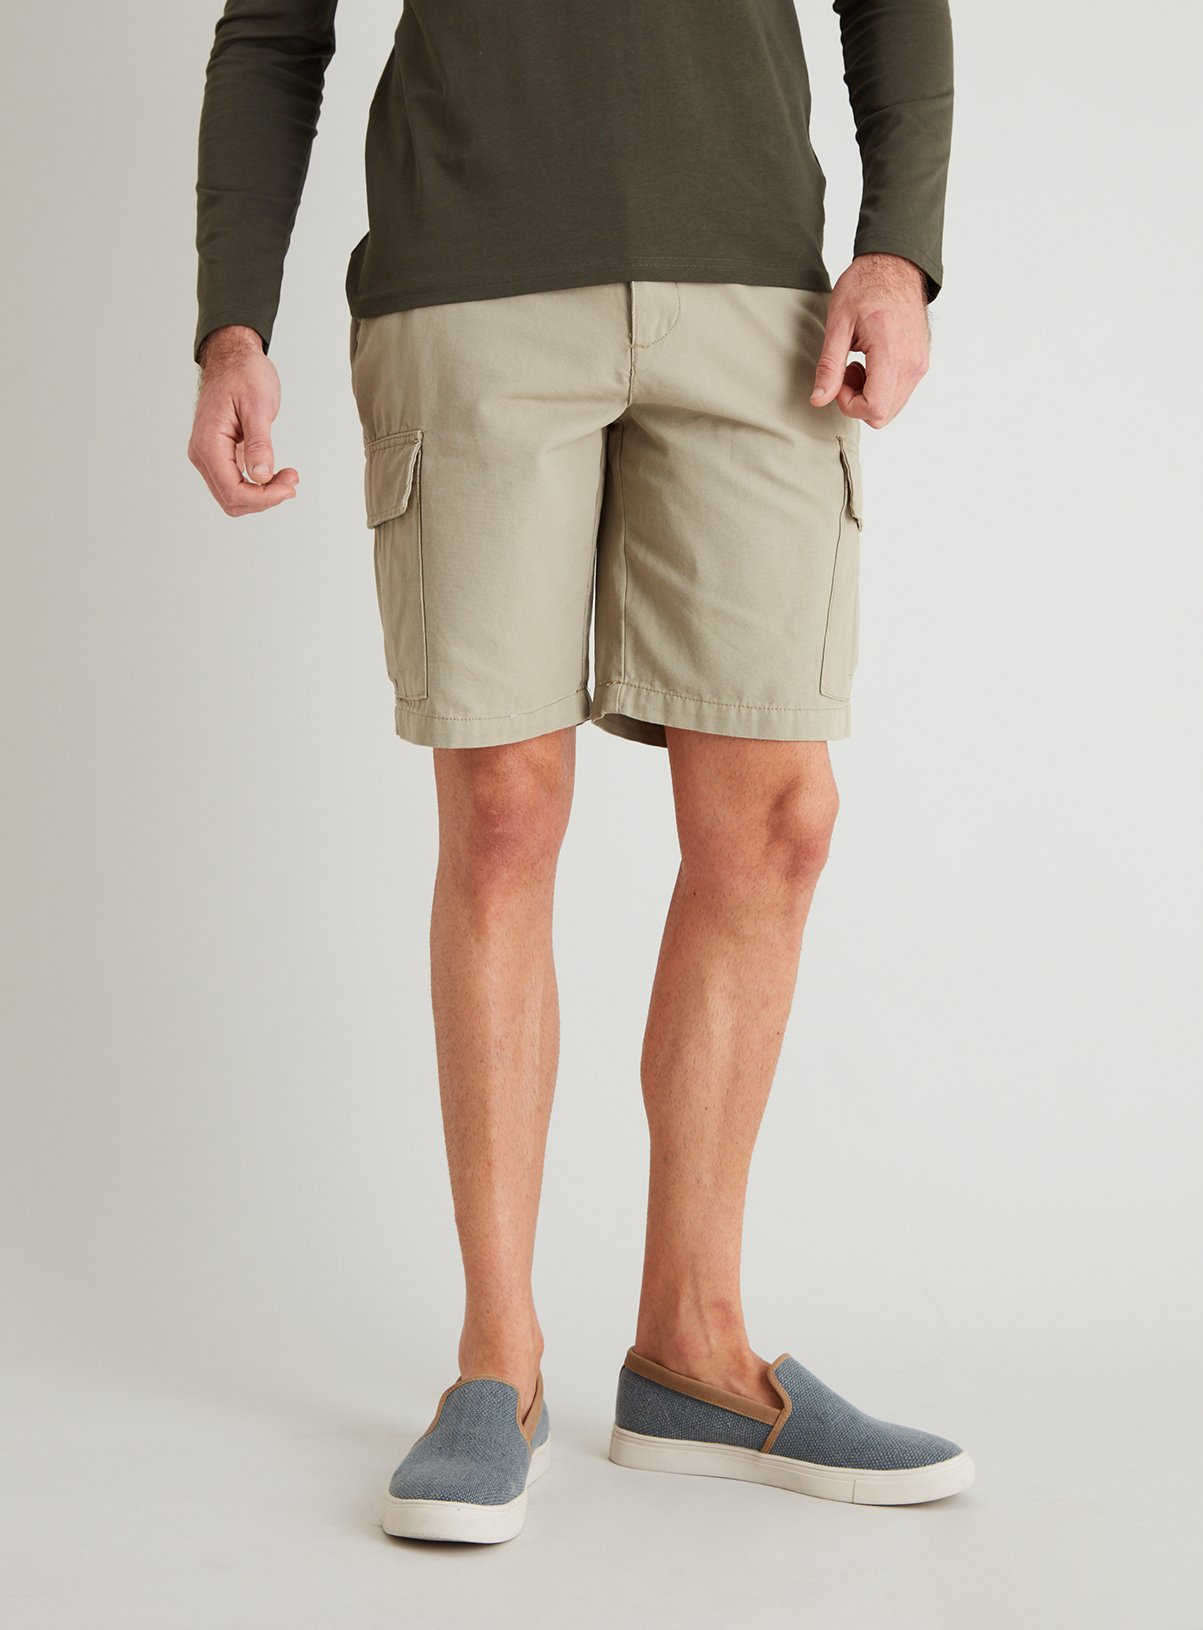 Stone Cargo Shorts Review